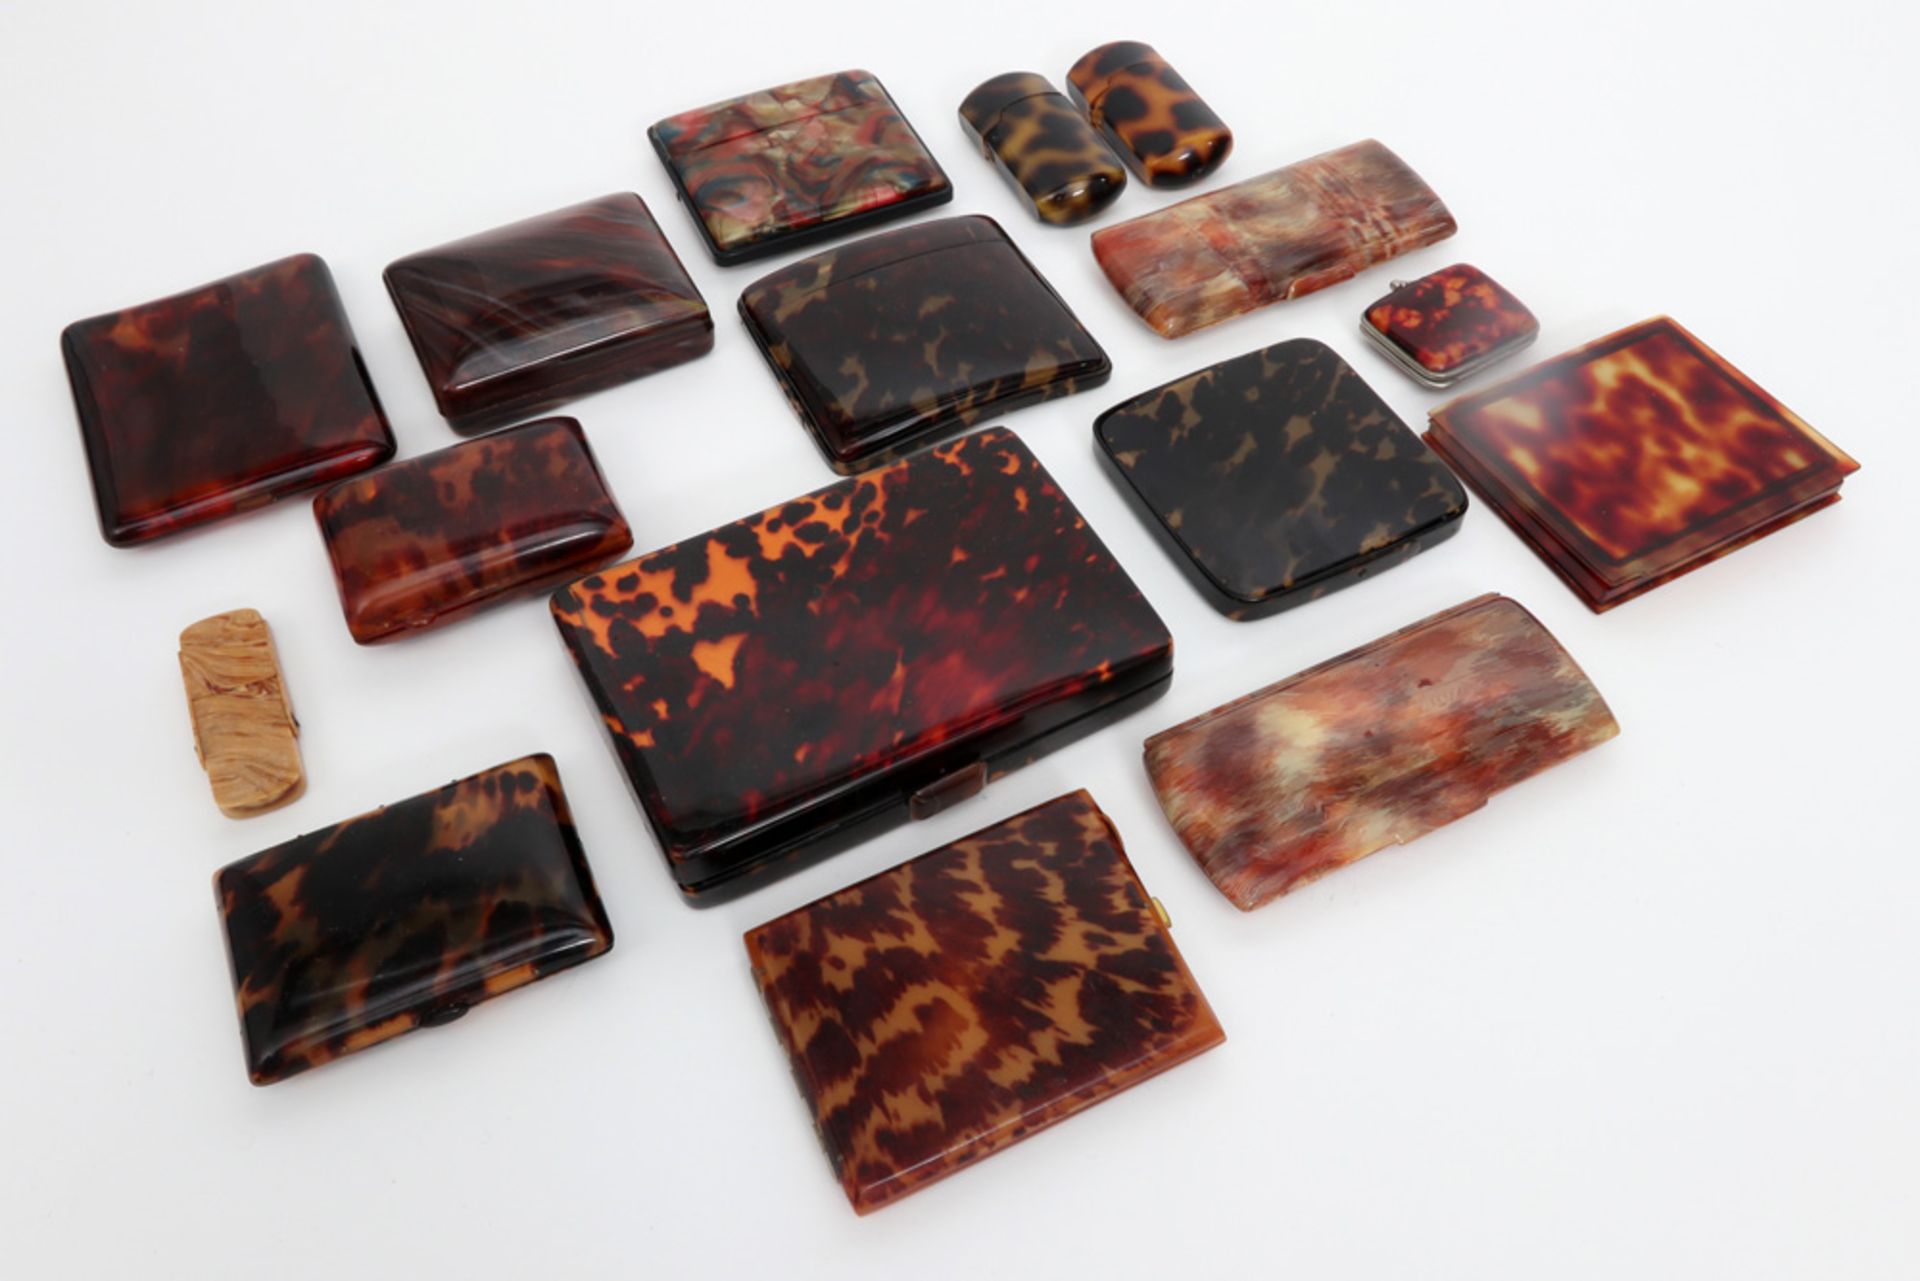 several small boxes in tortoiseshell or other materials || Lot doosjes in schildpad en ander